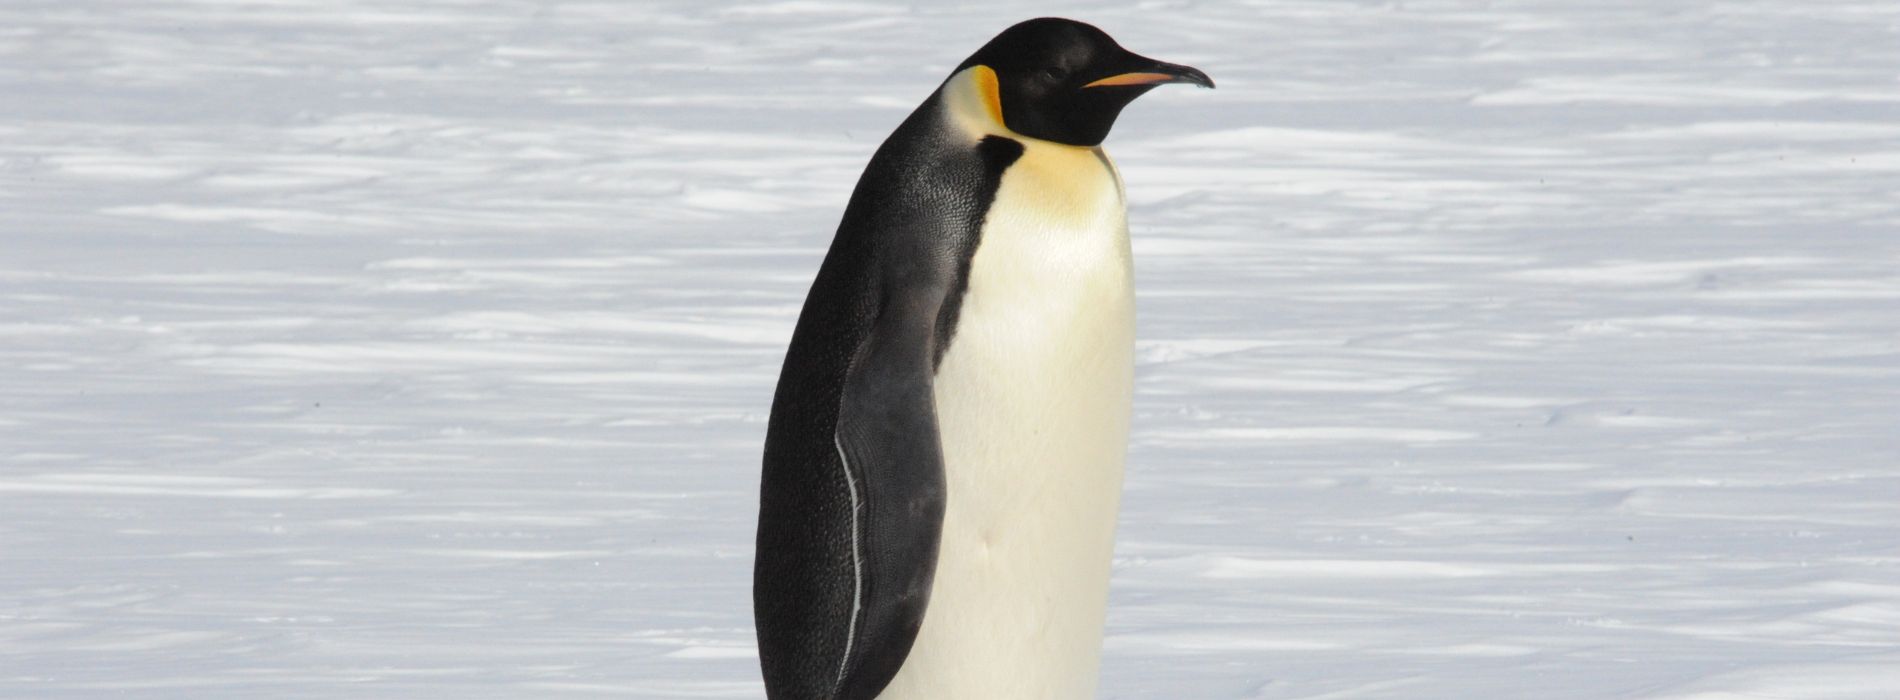 Is there a 6 foot penguin?